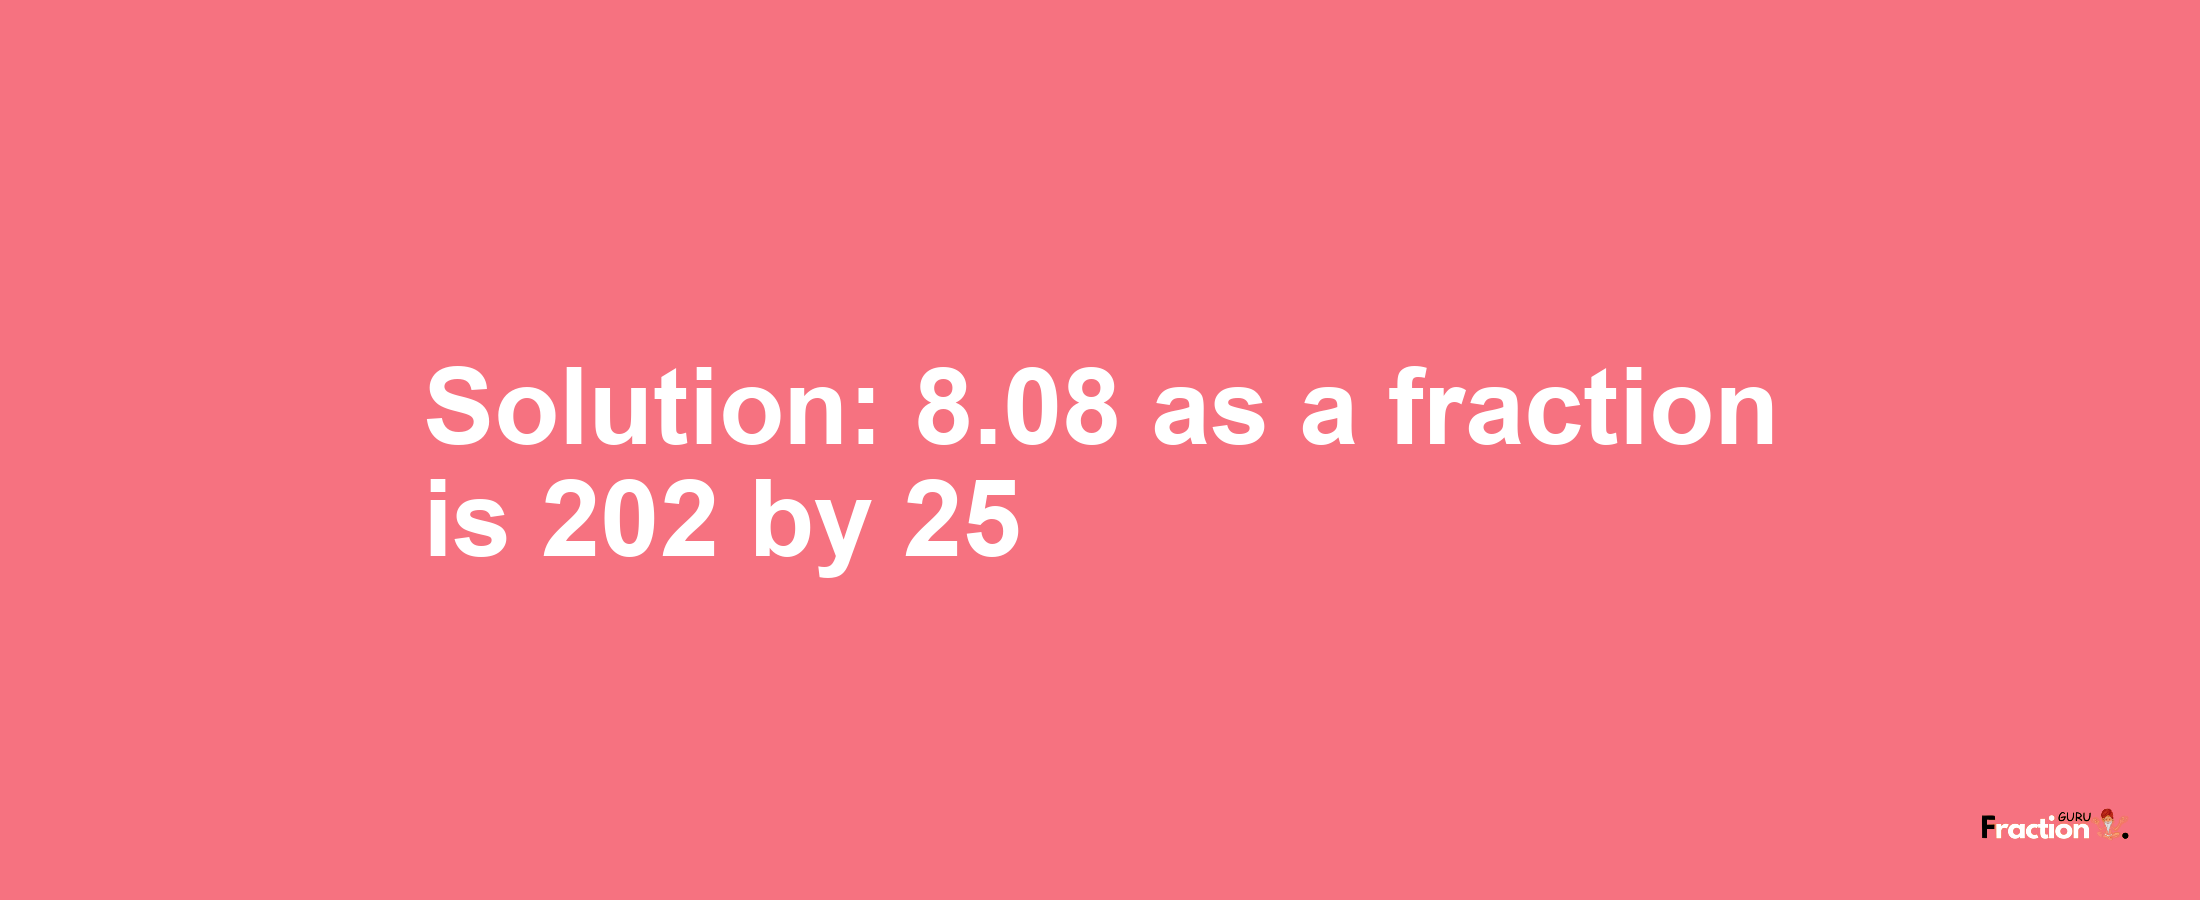 Solution:8.08 as a fraction is 202/25